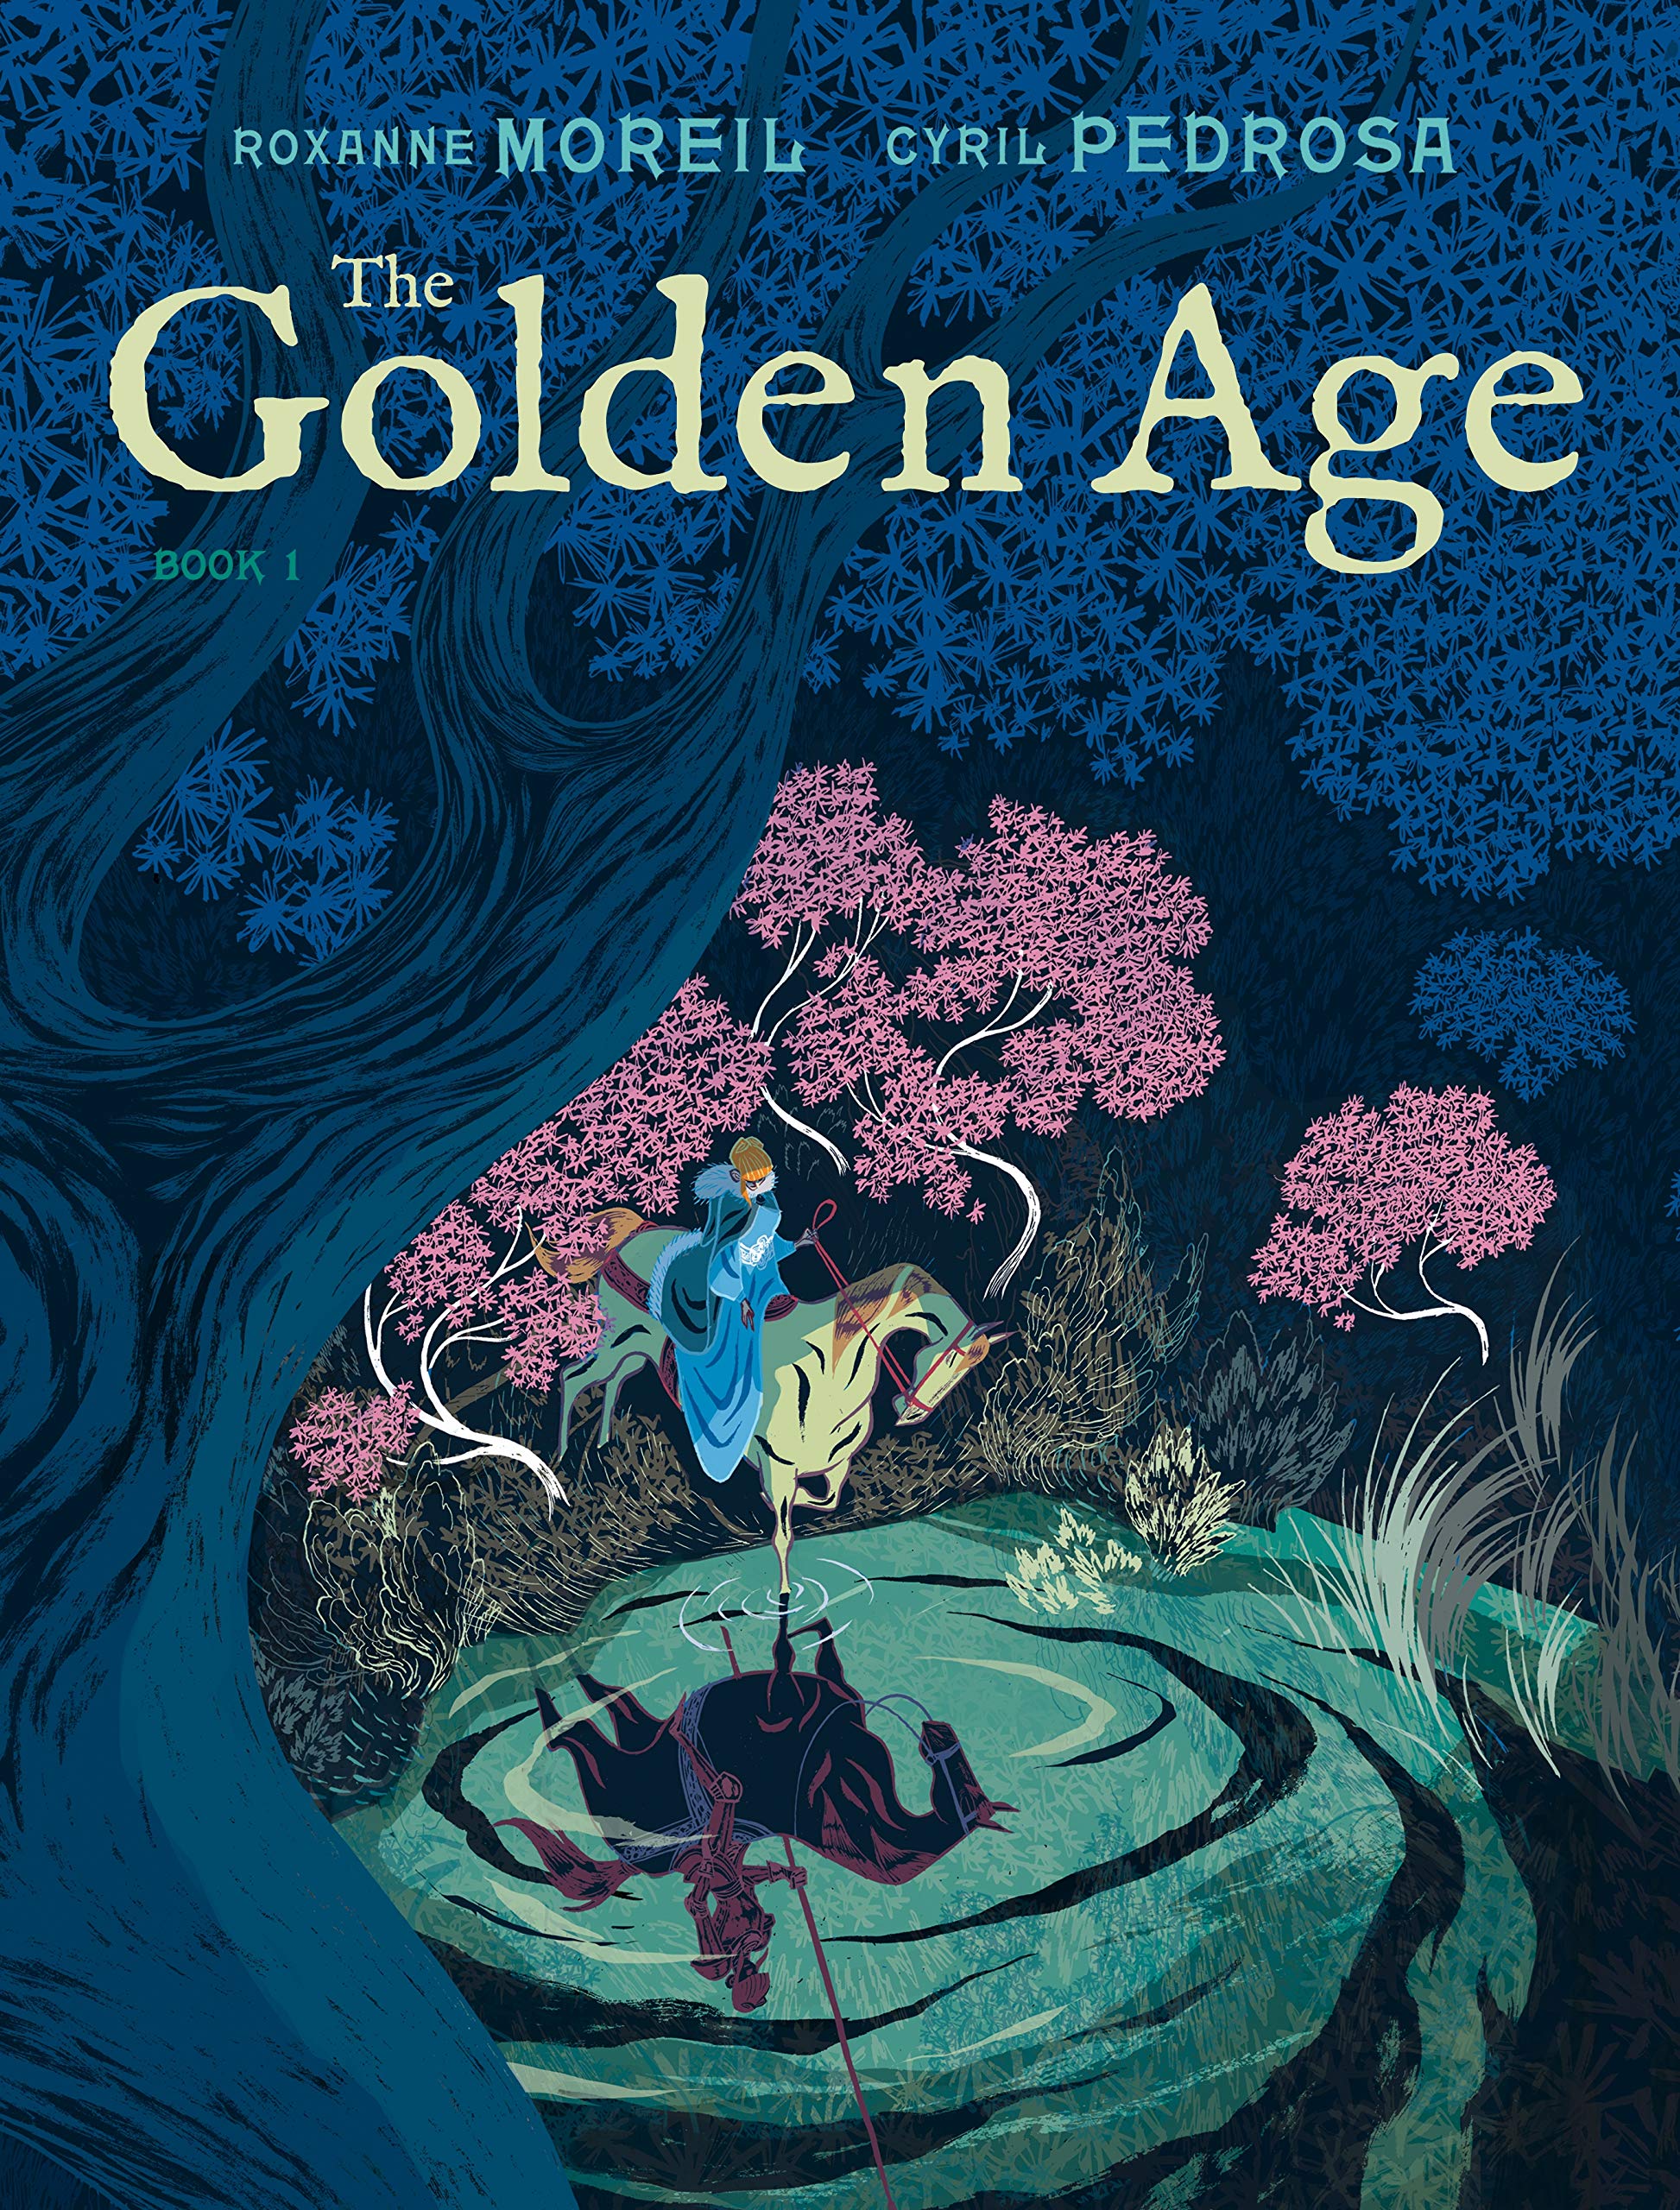 Graphic Novels for Winter 2020: The Golden Age